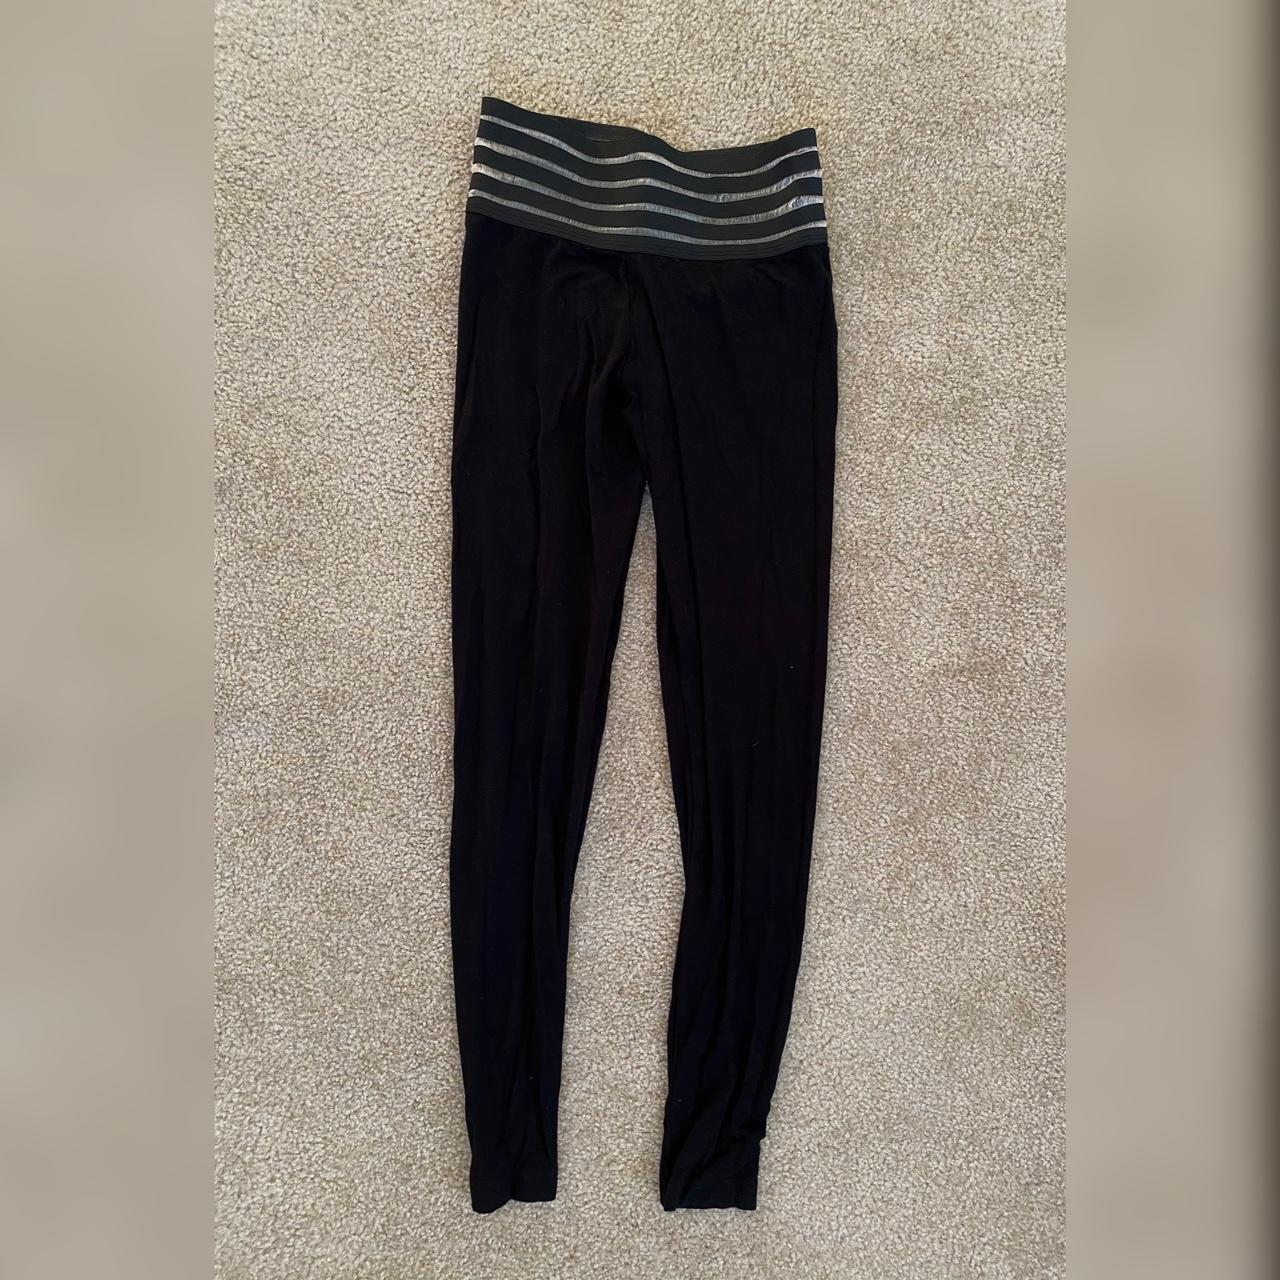 Cute Booty Lounge black leggings, size small. These... - Depop